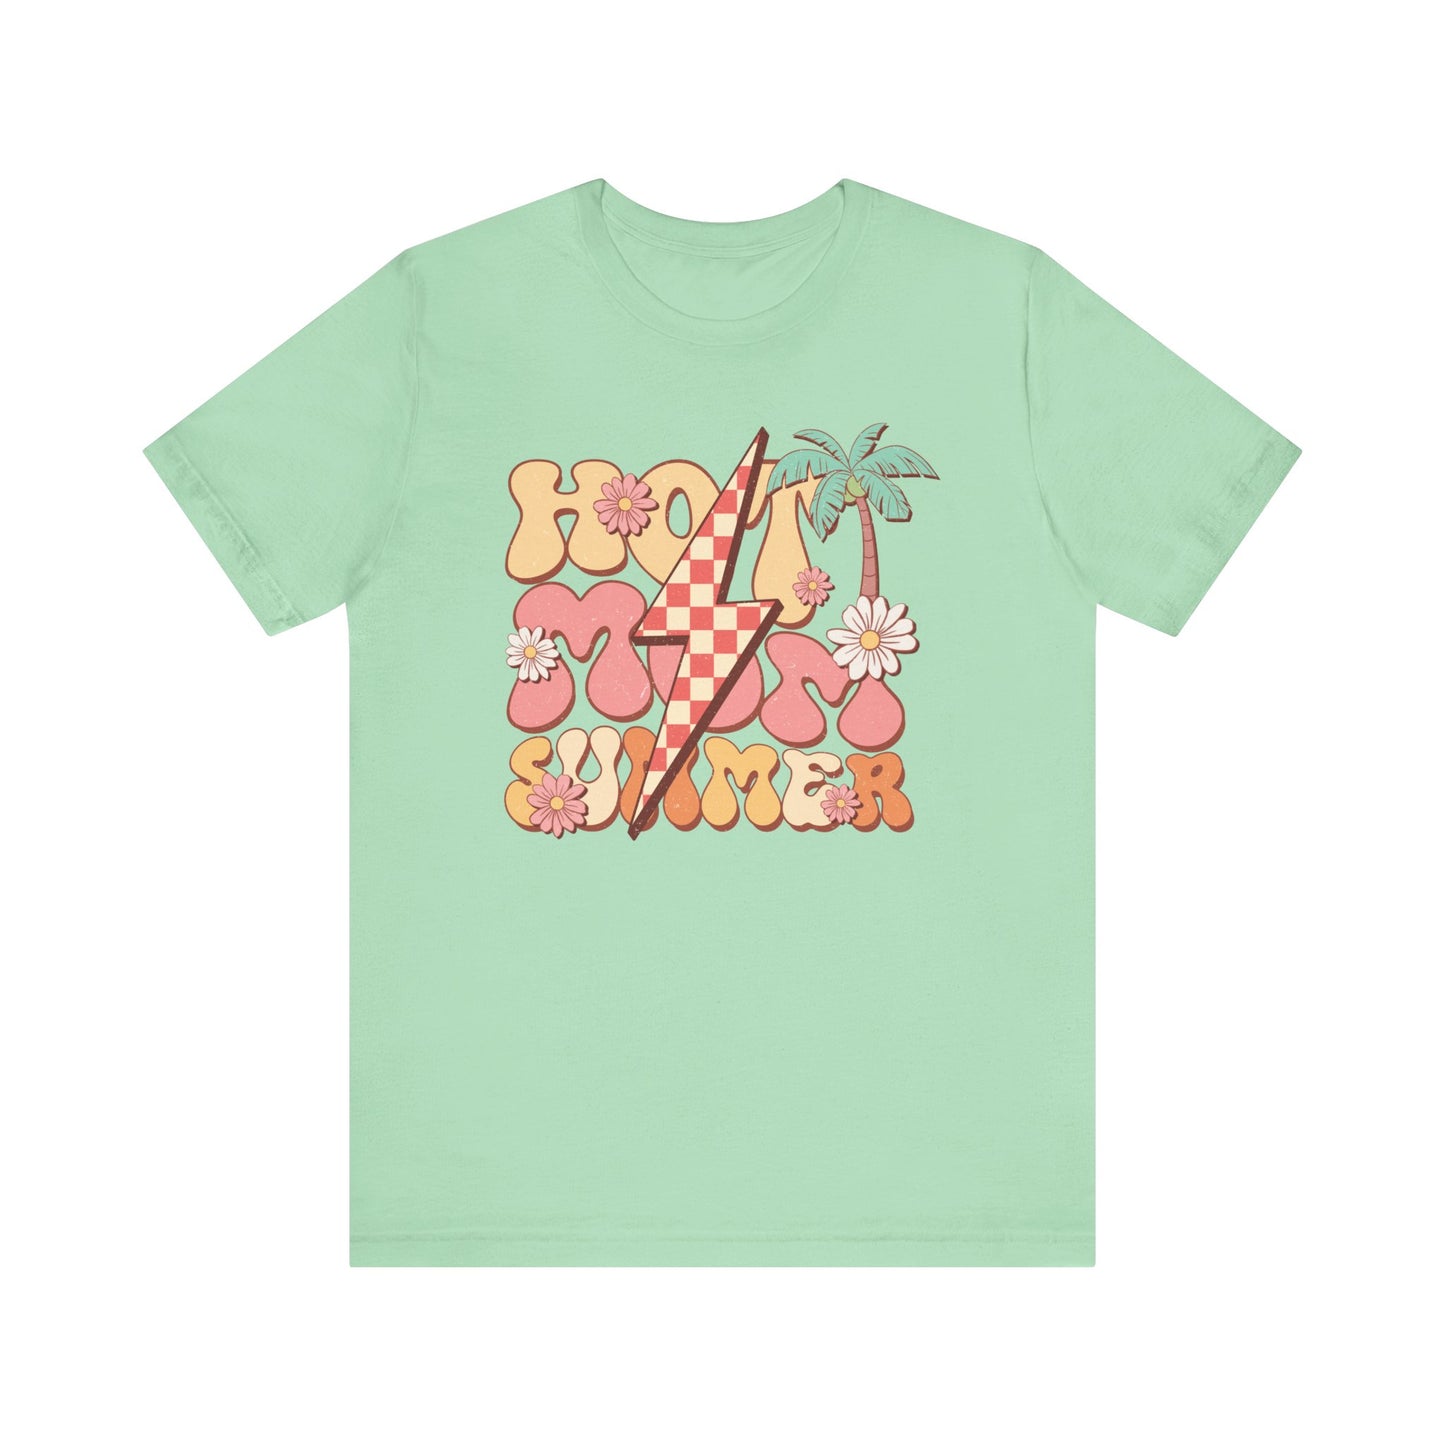 Retro Summer Vibes T-shirt, Aesthetic Vintage Beach Graphic Tee, Unisex Casual Palm Tree Top